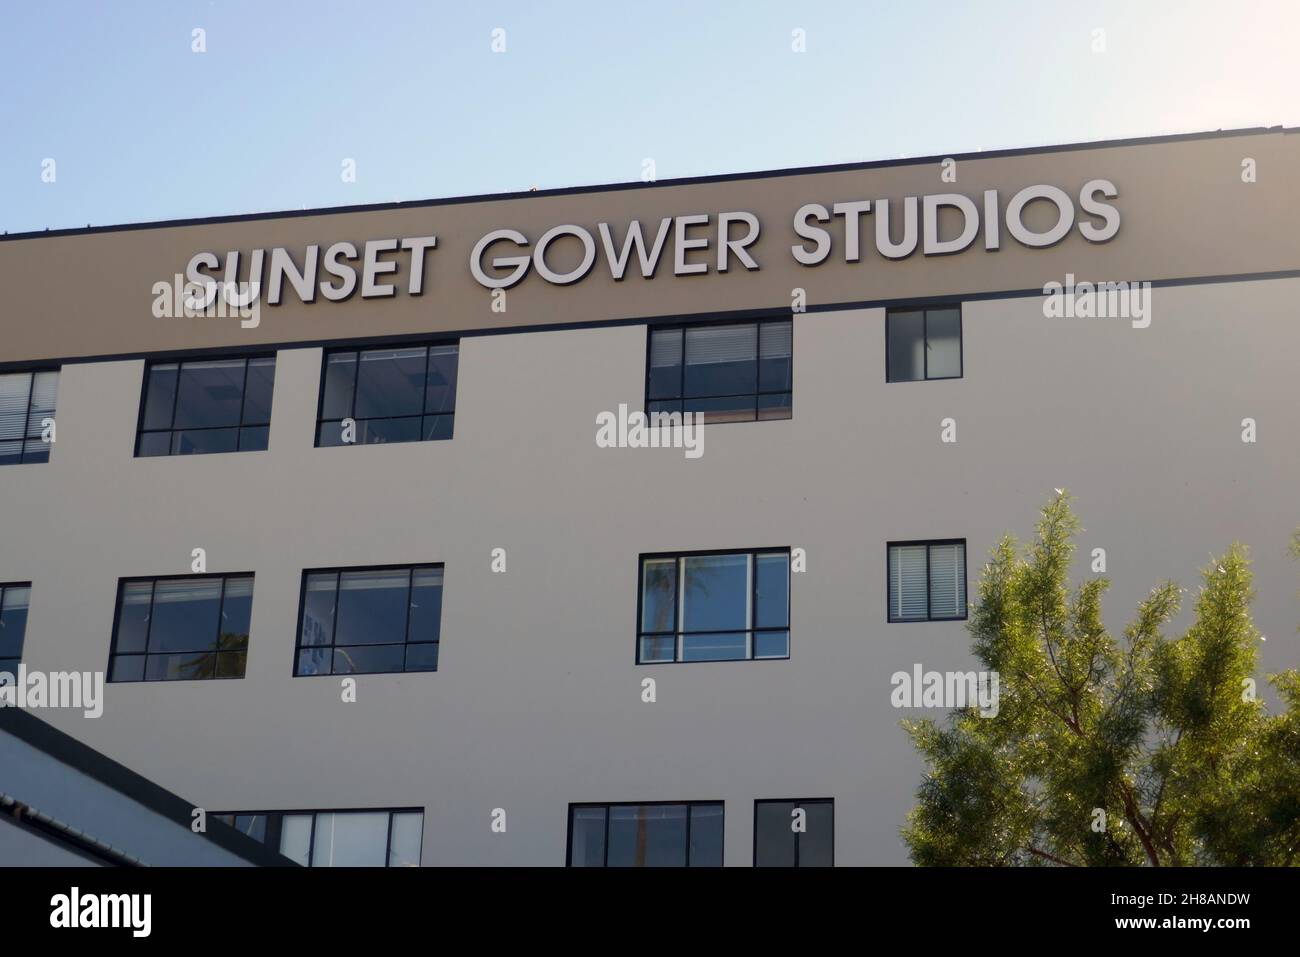 Los Angeles, California, USA 27th November 2021 A general view of atmosphere of Sunset Gower Studios, where Meghan Markle filmed Deal or No Deal, Columbia Classics It Happened One Night, Mr. Smith Goes to Washington, Three Stooges Shorts, Funny Girl, The Caine Mutiny, filmed here and Television Shows Scandal, How to Get Away With Murder, Saved by the Bell, Married With Children, Jag, Six Feet Under, Dexter, The Donna Reed Show, Soap, That's So Raven, Moesha, Father Knows Best, I Dream of Jeannie all filmed here at Sunset Gower Studios at Sunset Blvd and Gower Street on November 27, 2021 in Los Stock Photo